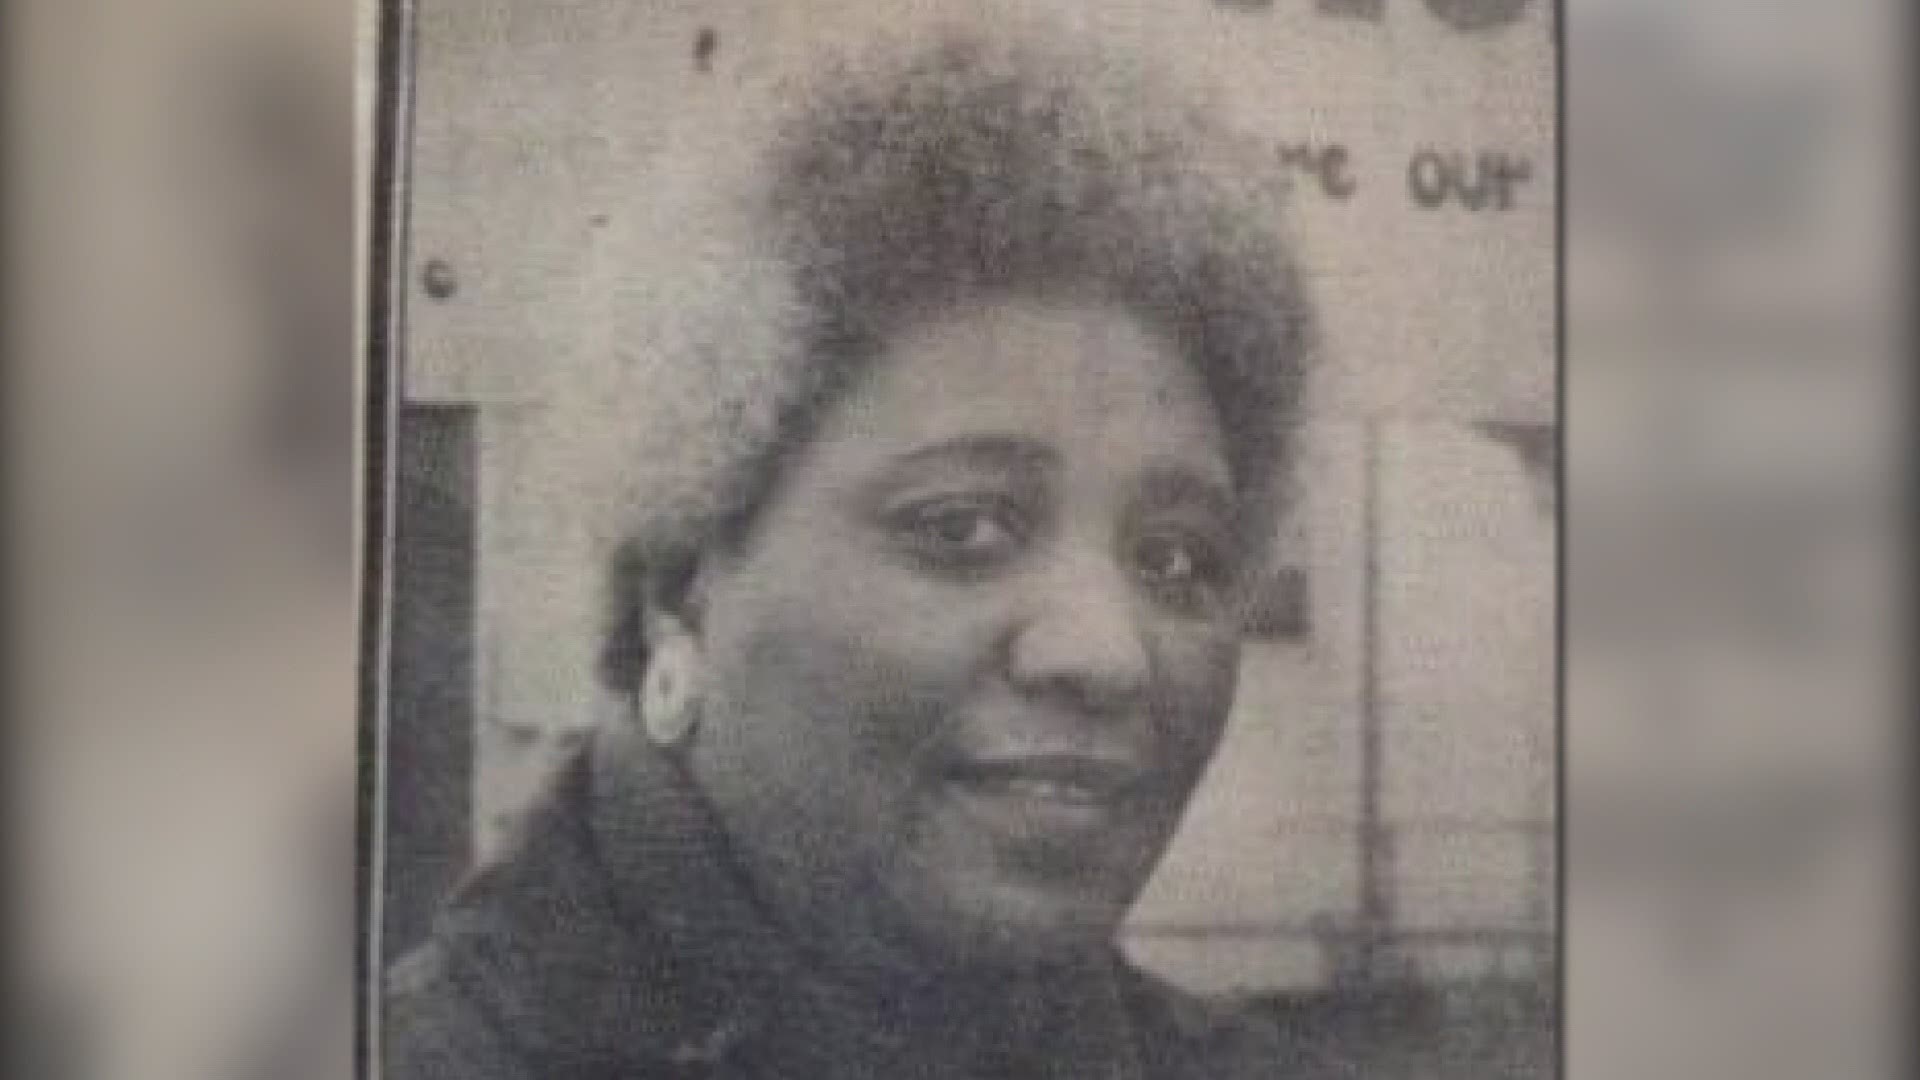 In 1989, the city decided to honor her legacy by renaming a portion of Dryades street after her. They chose the area where one of her first offices was located.